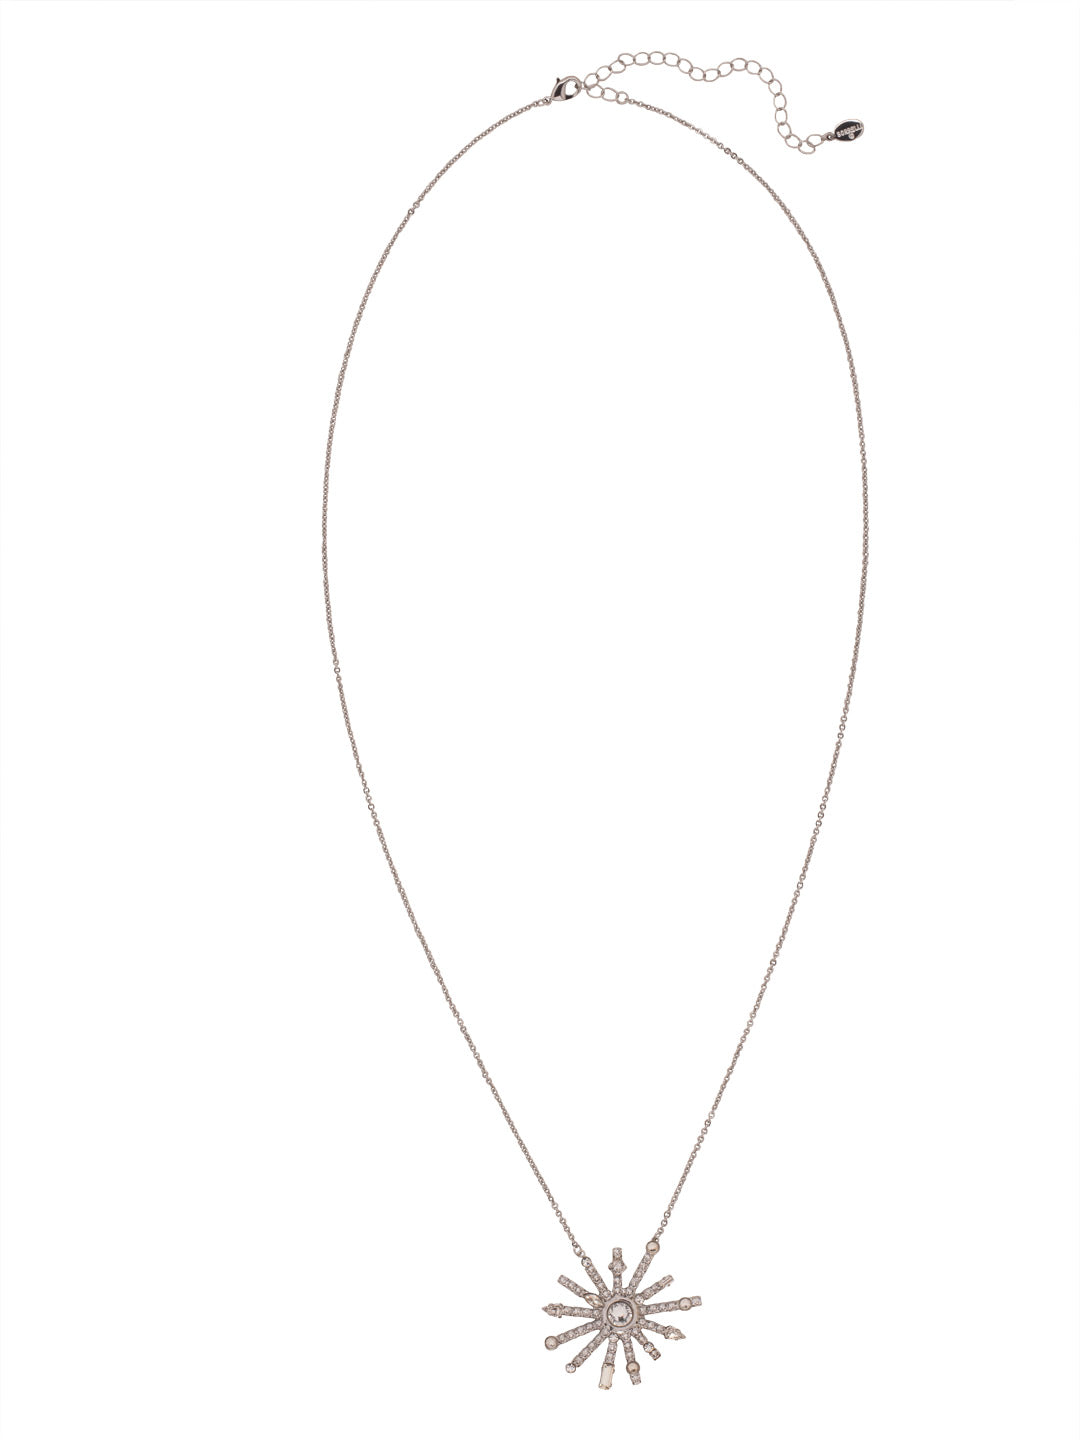 Starburst Long Necklace - 4NFC19PDCRY - <p>The Starburst Long Necklace features a metal pendant embellished with crystals, hanging at the base of an adjustable chain, and secured with a lobster claw clasp. From Sorrelli's Crystal collection in our Palladium finish.</p>